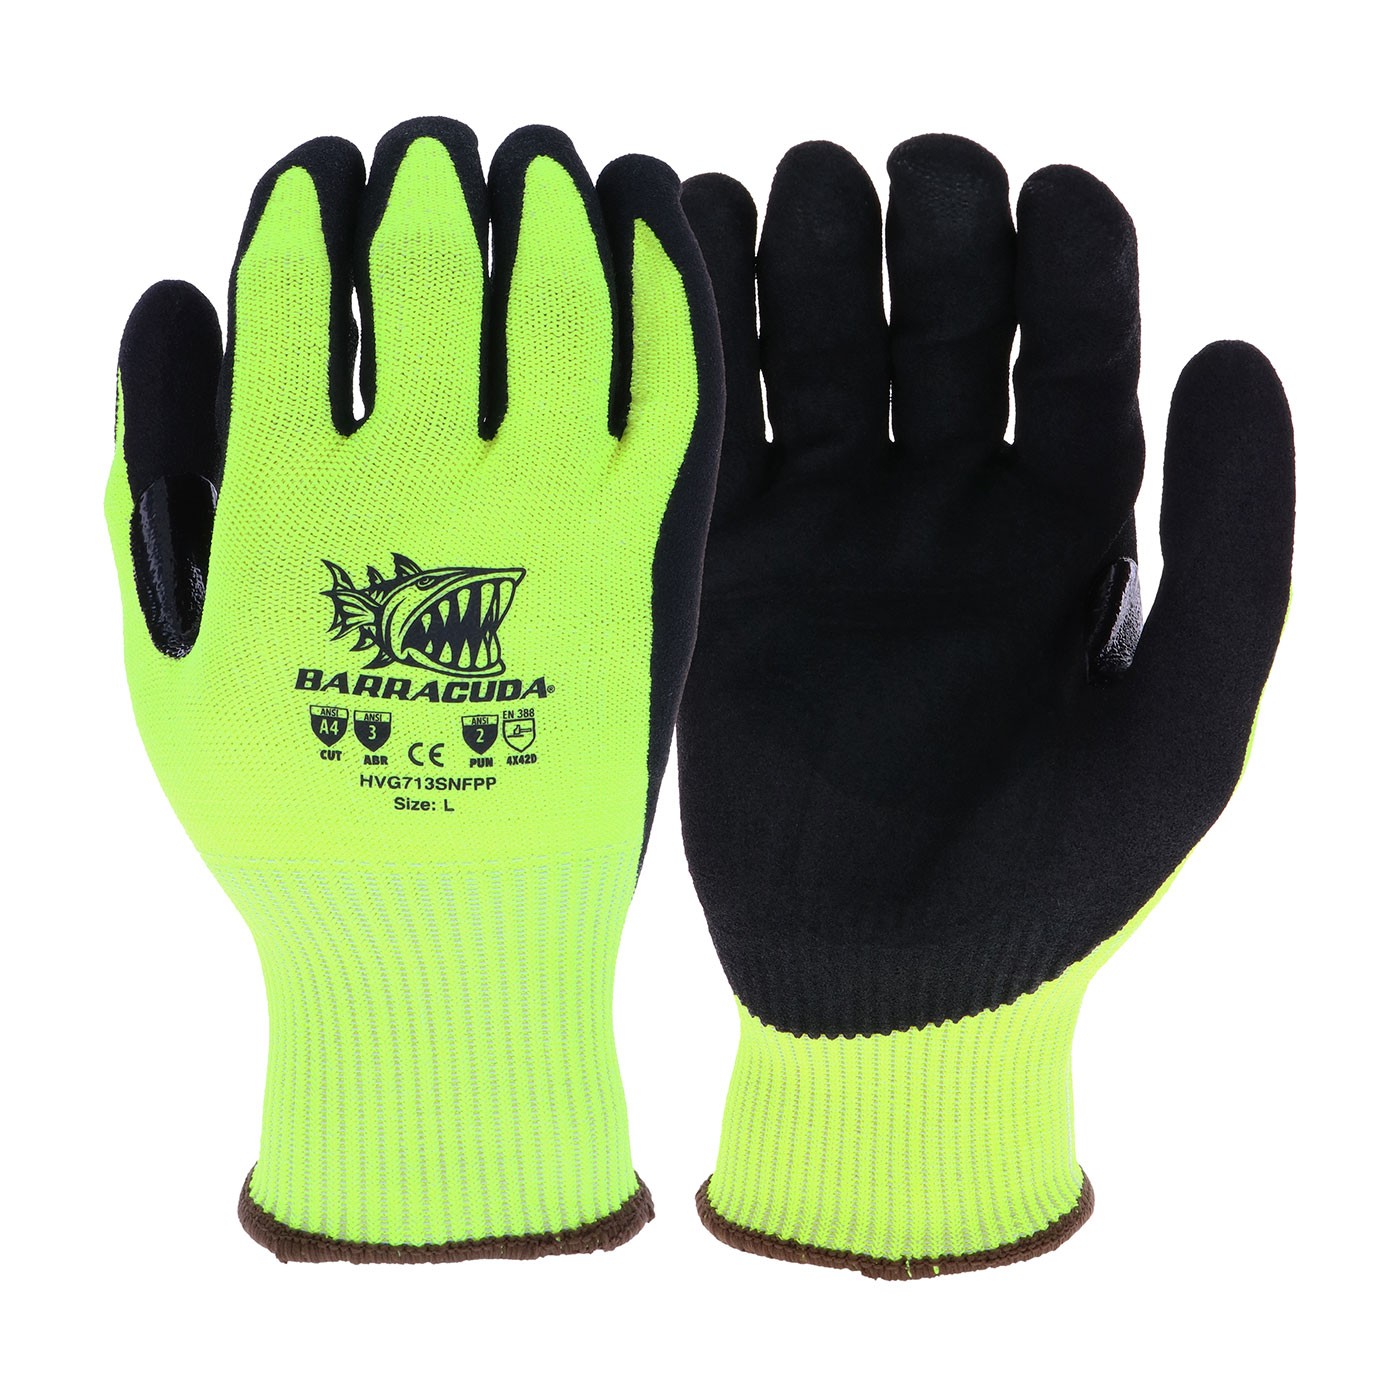 Barracuda® Hi-Vis Seamless Knit HPPE Blended Glove with Padded Palm and Nitrile Coated Sandy Grip on Palm & Fingers - Touchscreen Compatible  (#HVG713SNFPP)